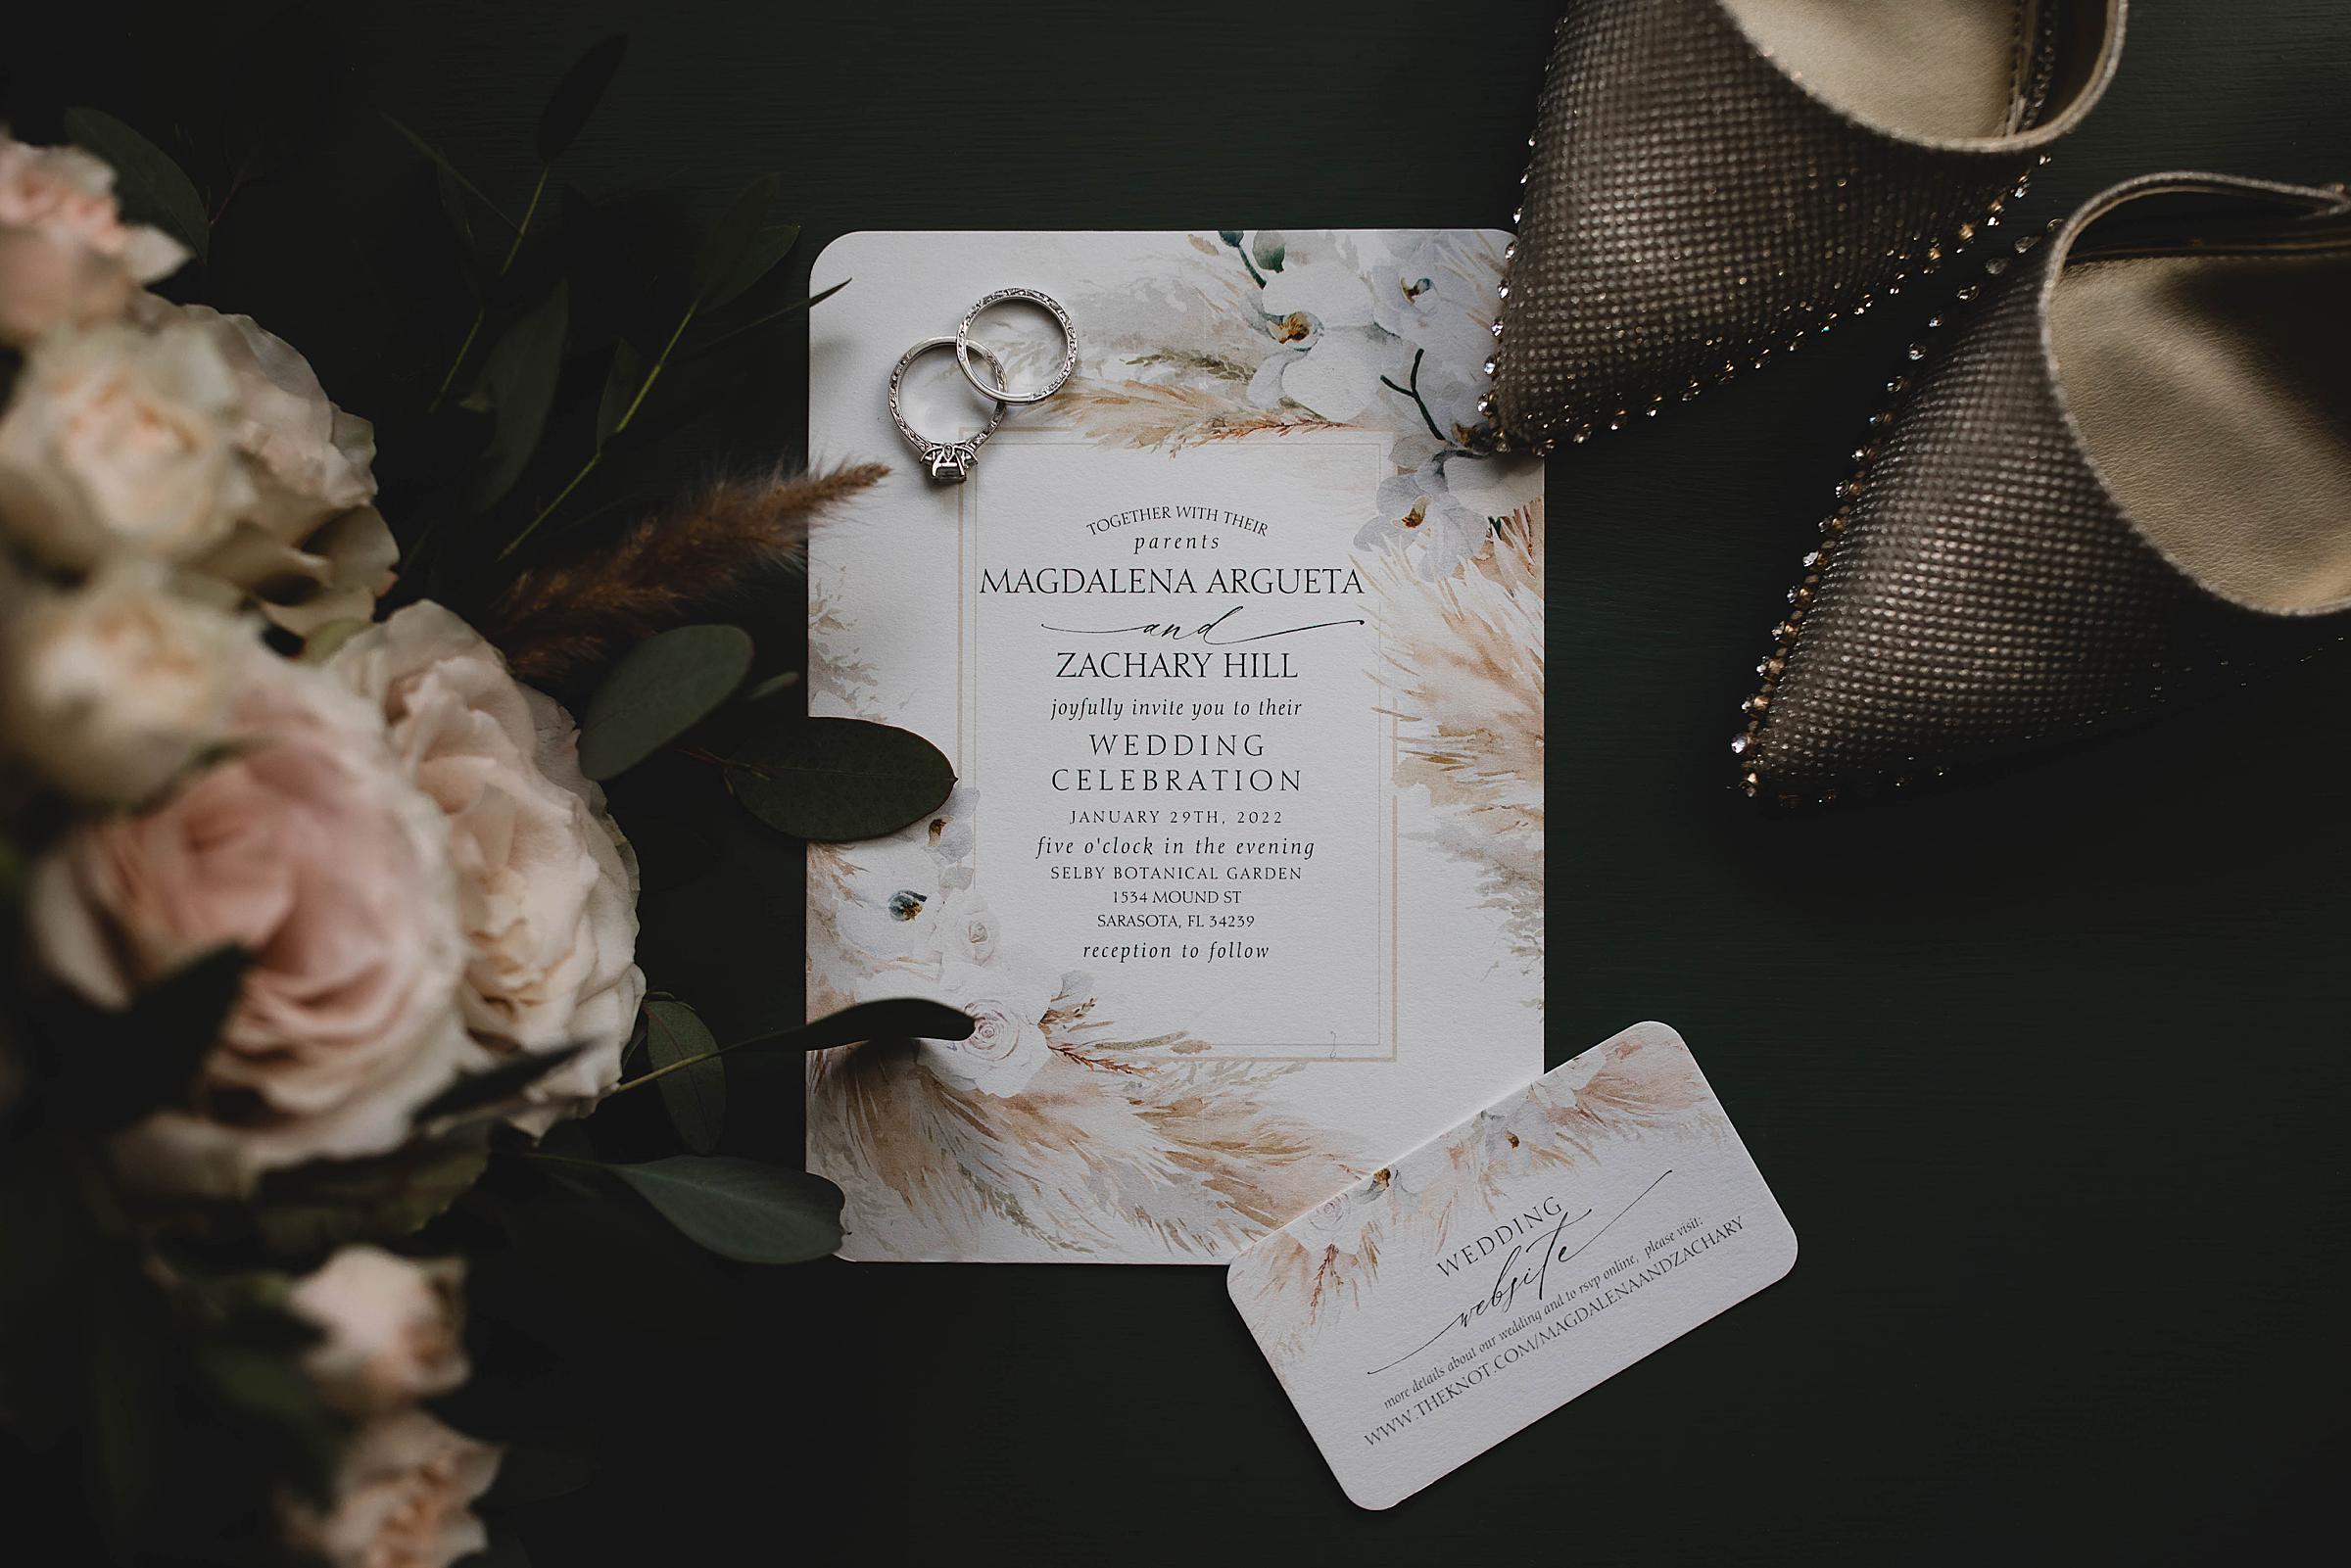 invitation suite and wedding rings at selby gardens wedding, wedding details in sarasota florida, juliana montane photography